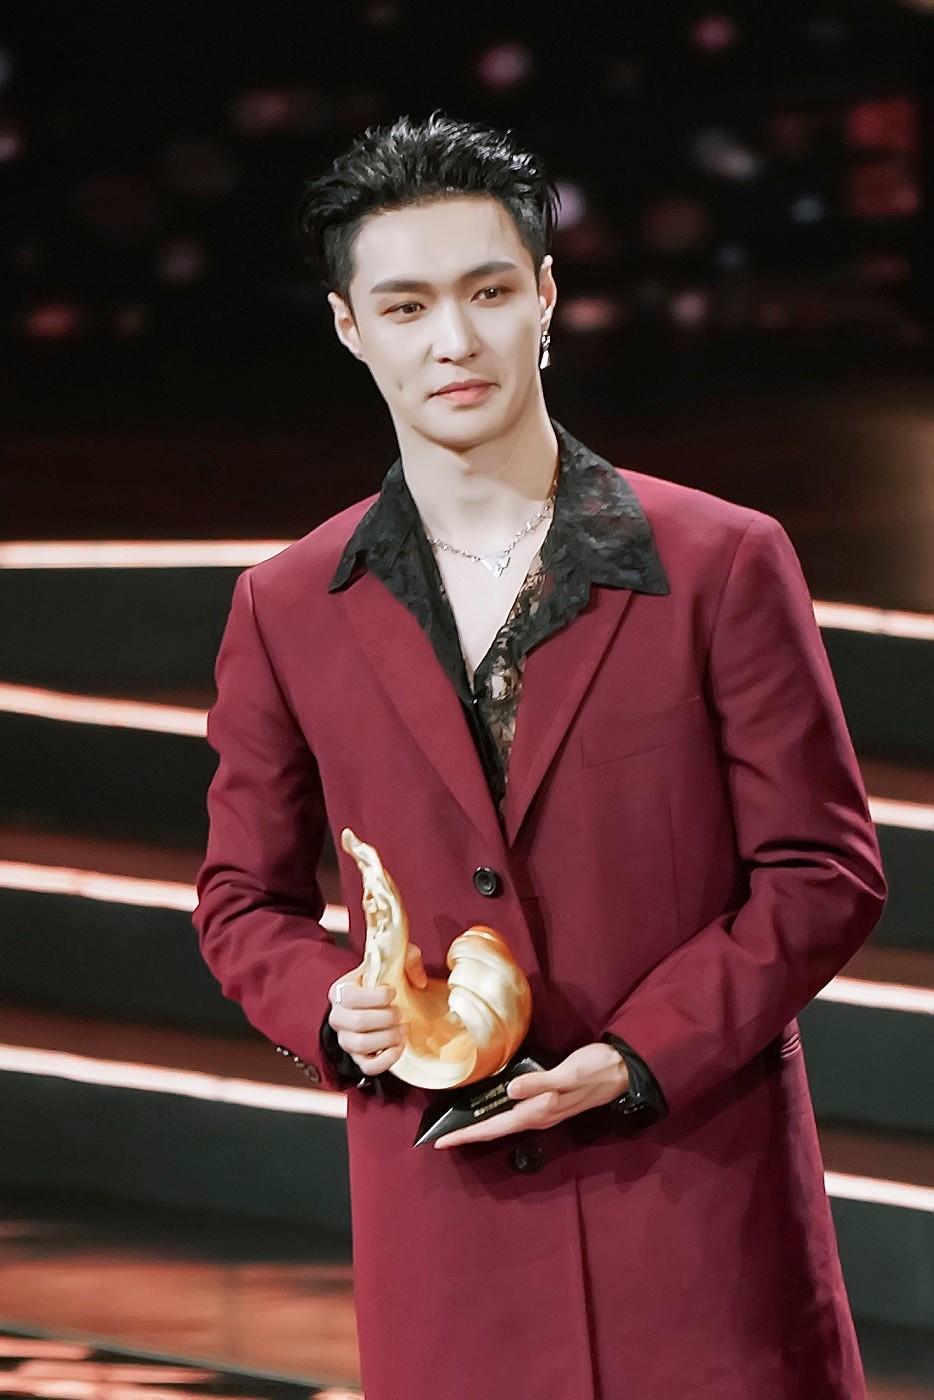 EXO Lay (a member of SM Entertainment) is sweeping through various awards ceremonies in China.Lay attended the 2019 Weibo Night held at Beijing Water Cube on November 11, winning the Best Producer of the Year Award and the Nam Shin Award of the Year.The 10th annual 2019 Weibo Night is an awards ceremony hosted by Chinas largest SNS Weibo, inviting Weibo to a hot star for a year.Lay was selected as the winner in 2019 for his production, as well as for his visuals, popularity and topicality.Lay also received the All-Star of the Year award at the 2019 ByteDance Yearbook held at the Beijing Cadillac Arena on the 8th.The awards ceremony was hosted by ByteDance and News Application Jinrto Oo, which are providing video sharing application ticktok, and selected excellent people and contents that are outstanding in the popular culture industry based on big data in ByteDance platform.As a result, Lay was held in December last year 2019 Tencent Music Entertainment Awards three-time king, 2020 Aichi night of shout including two gold medals totaled 8 gold medals.